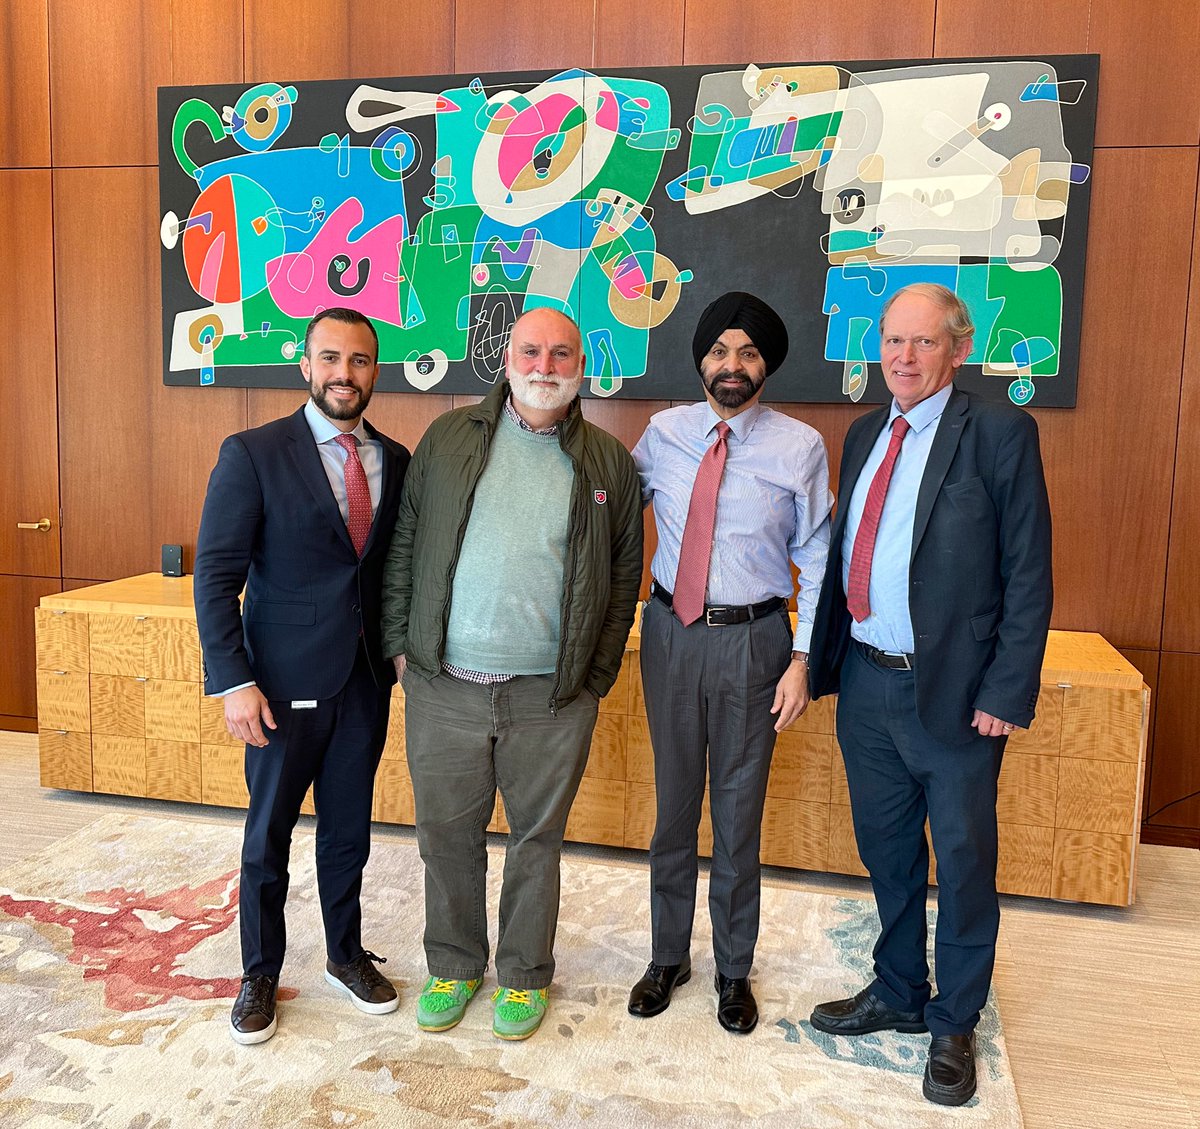 Connecting the dots with two transformative leaders: @WCKitchen founder @chefjoseandres & @WorldBank President Ajay Banga. Utterly inspired for how we can work together to address #food & #nutrition security around the world. #ChefsForTheWorld